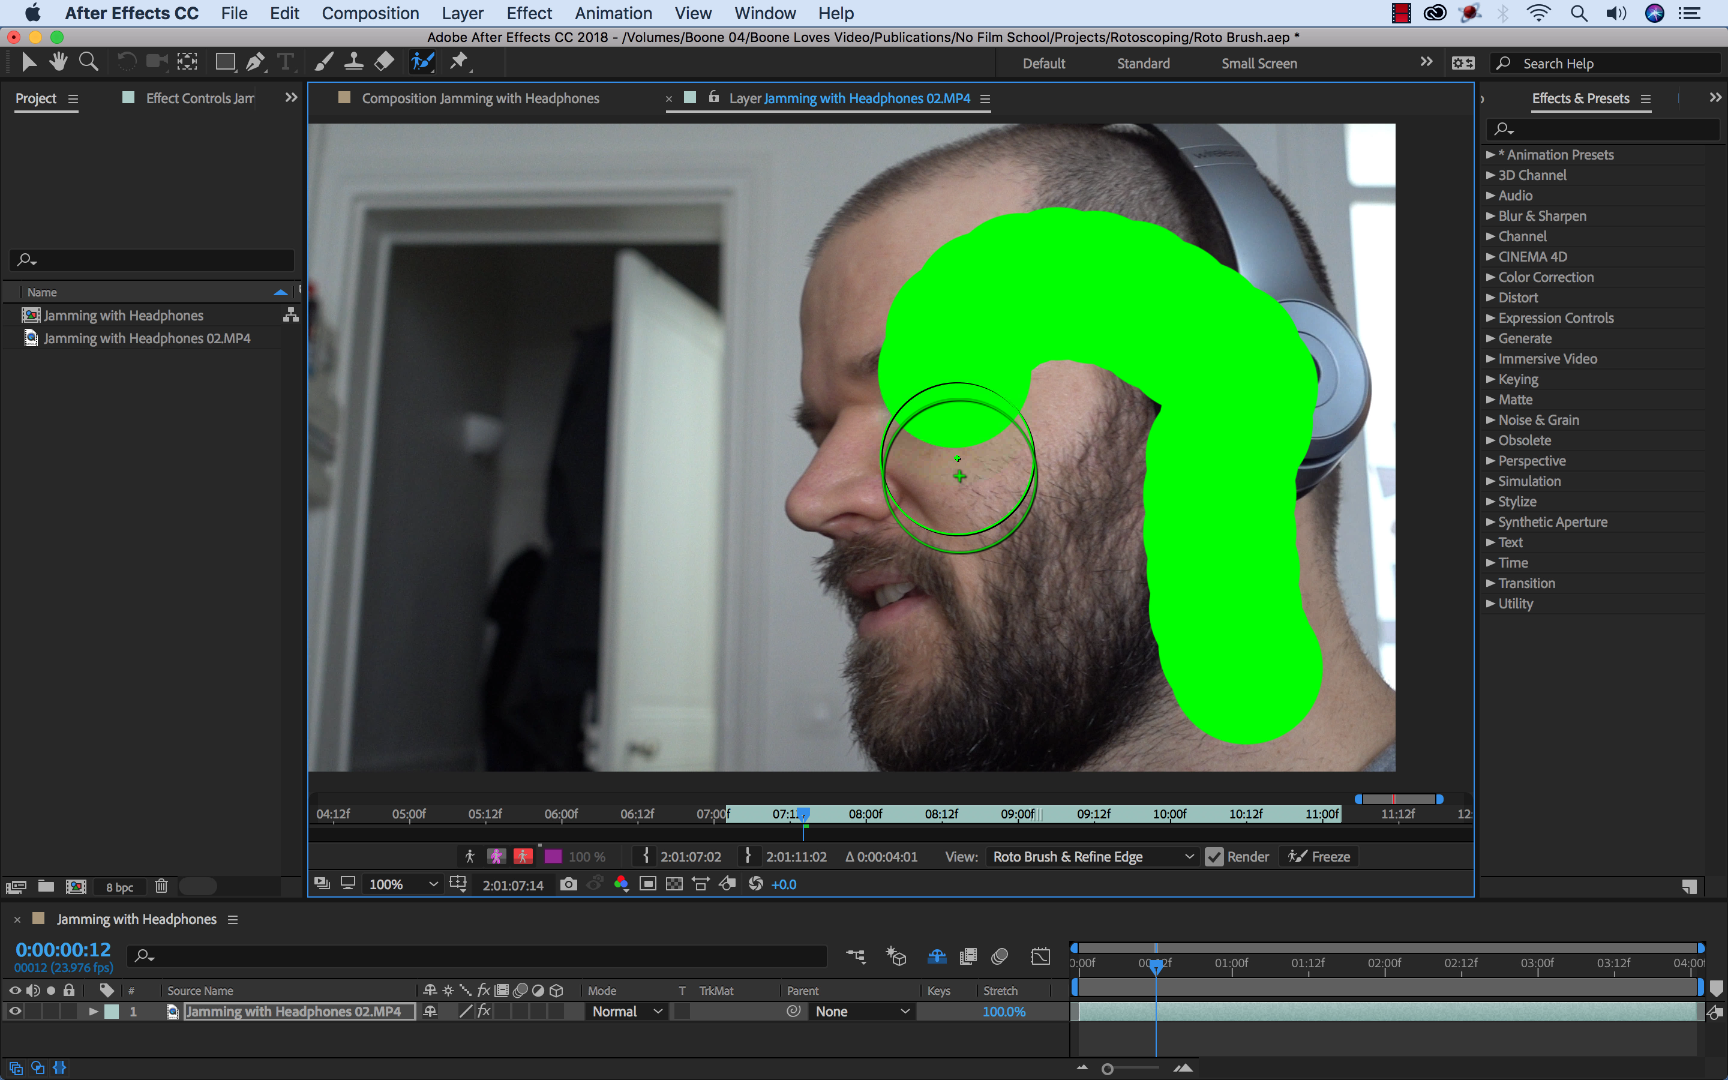 The Roto Brush from Adobe After Effects Makes Rotoscoping Painless